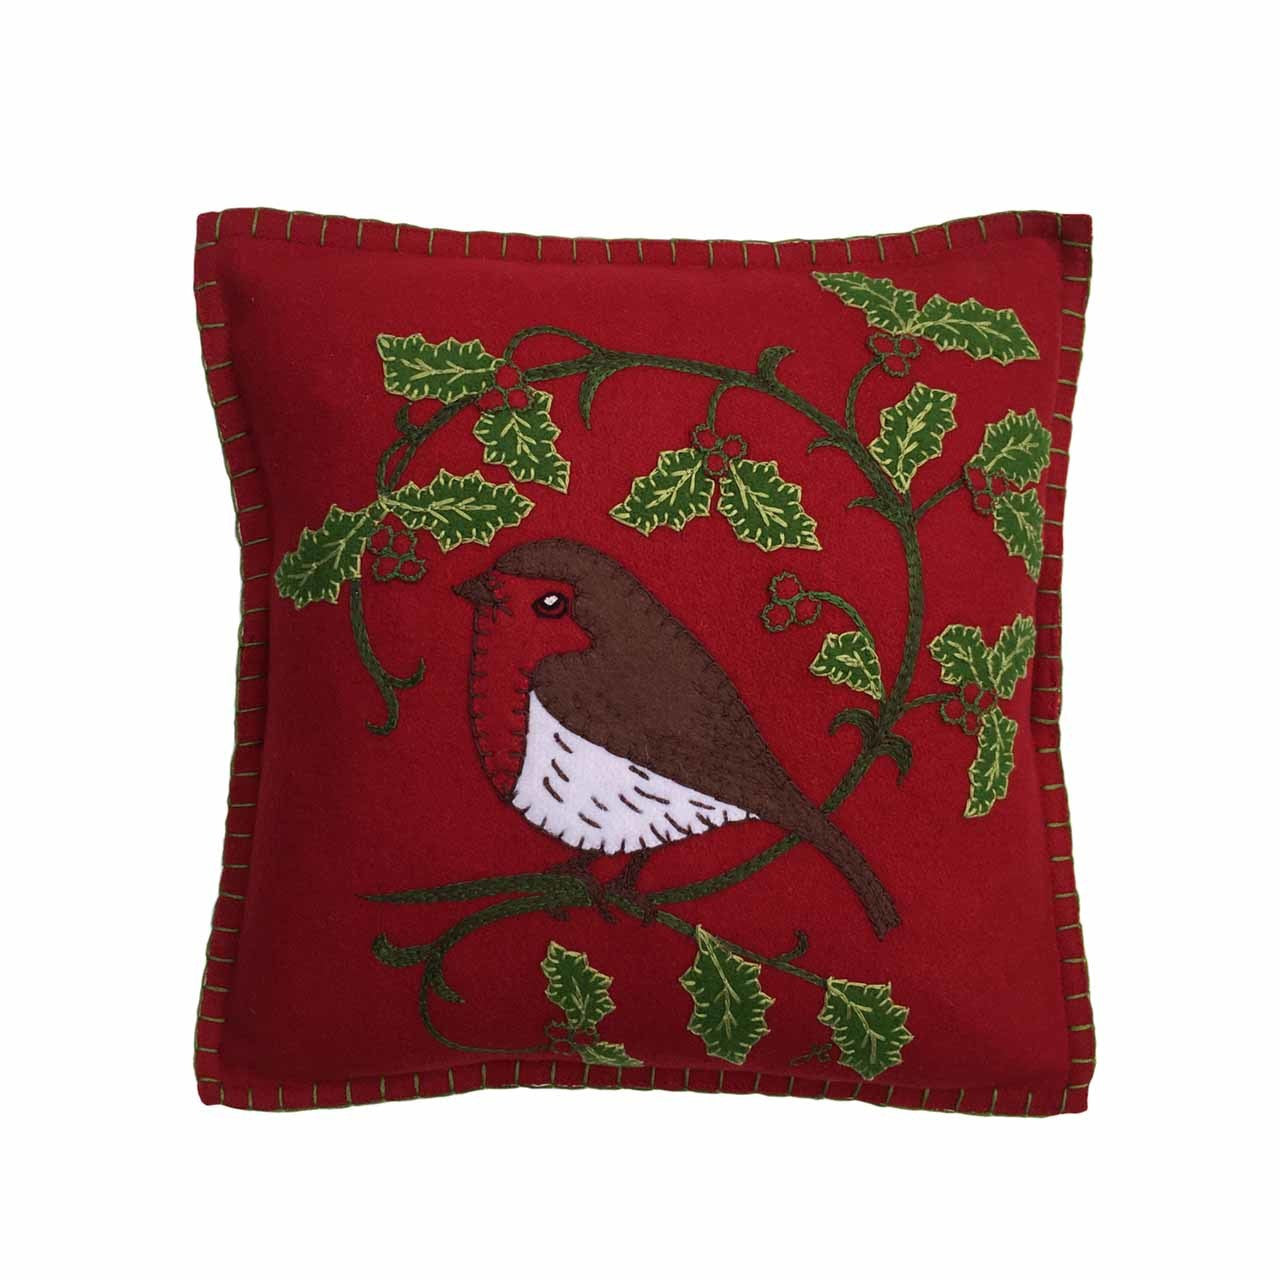 Holly Robin cushion in red. Hand embroided from Jan Constantine, England.